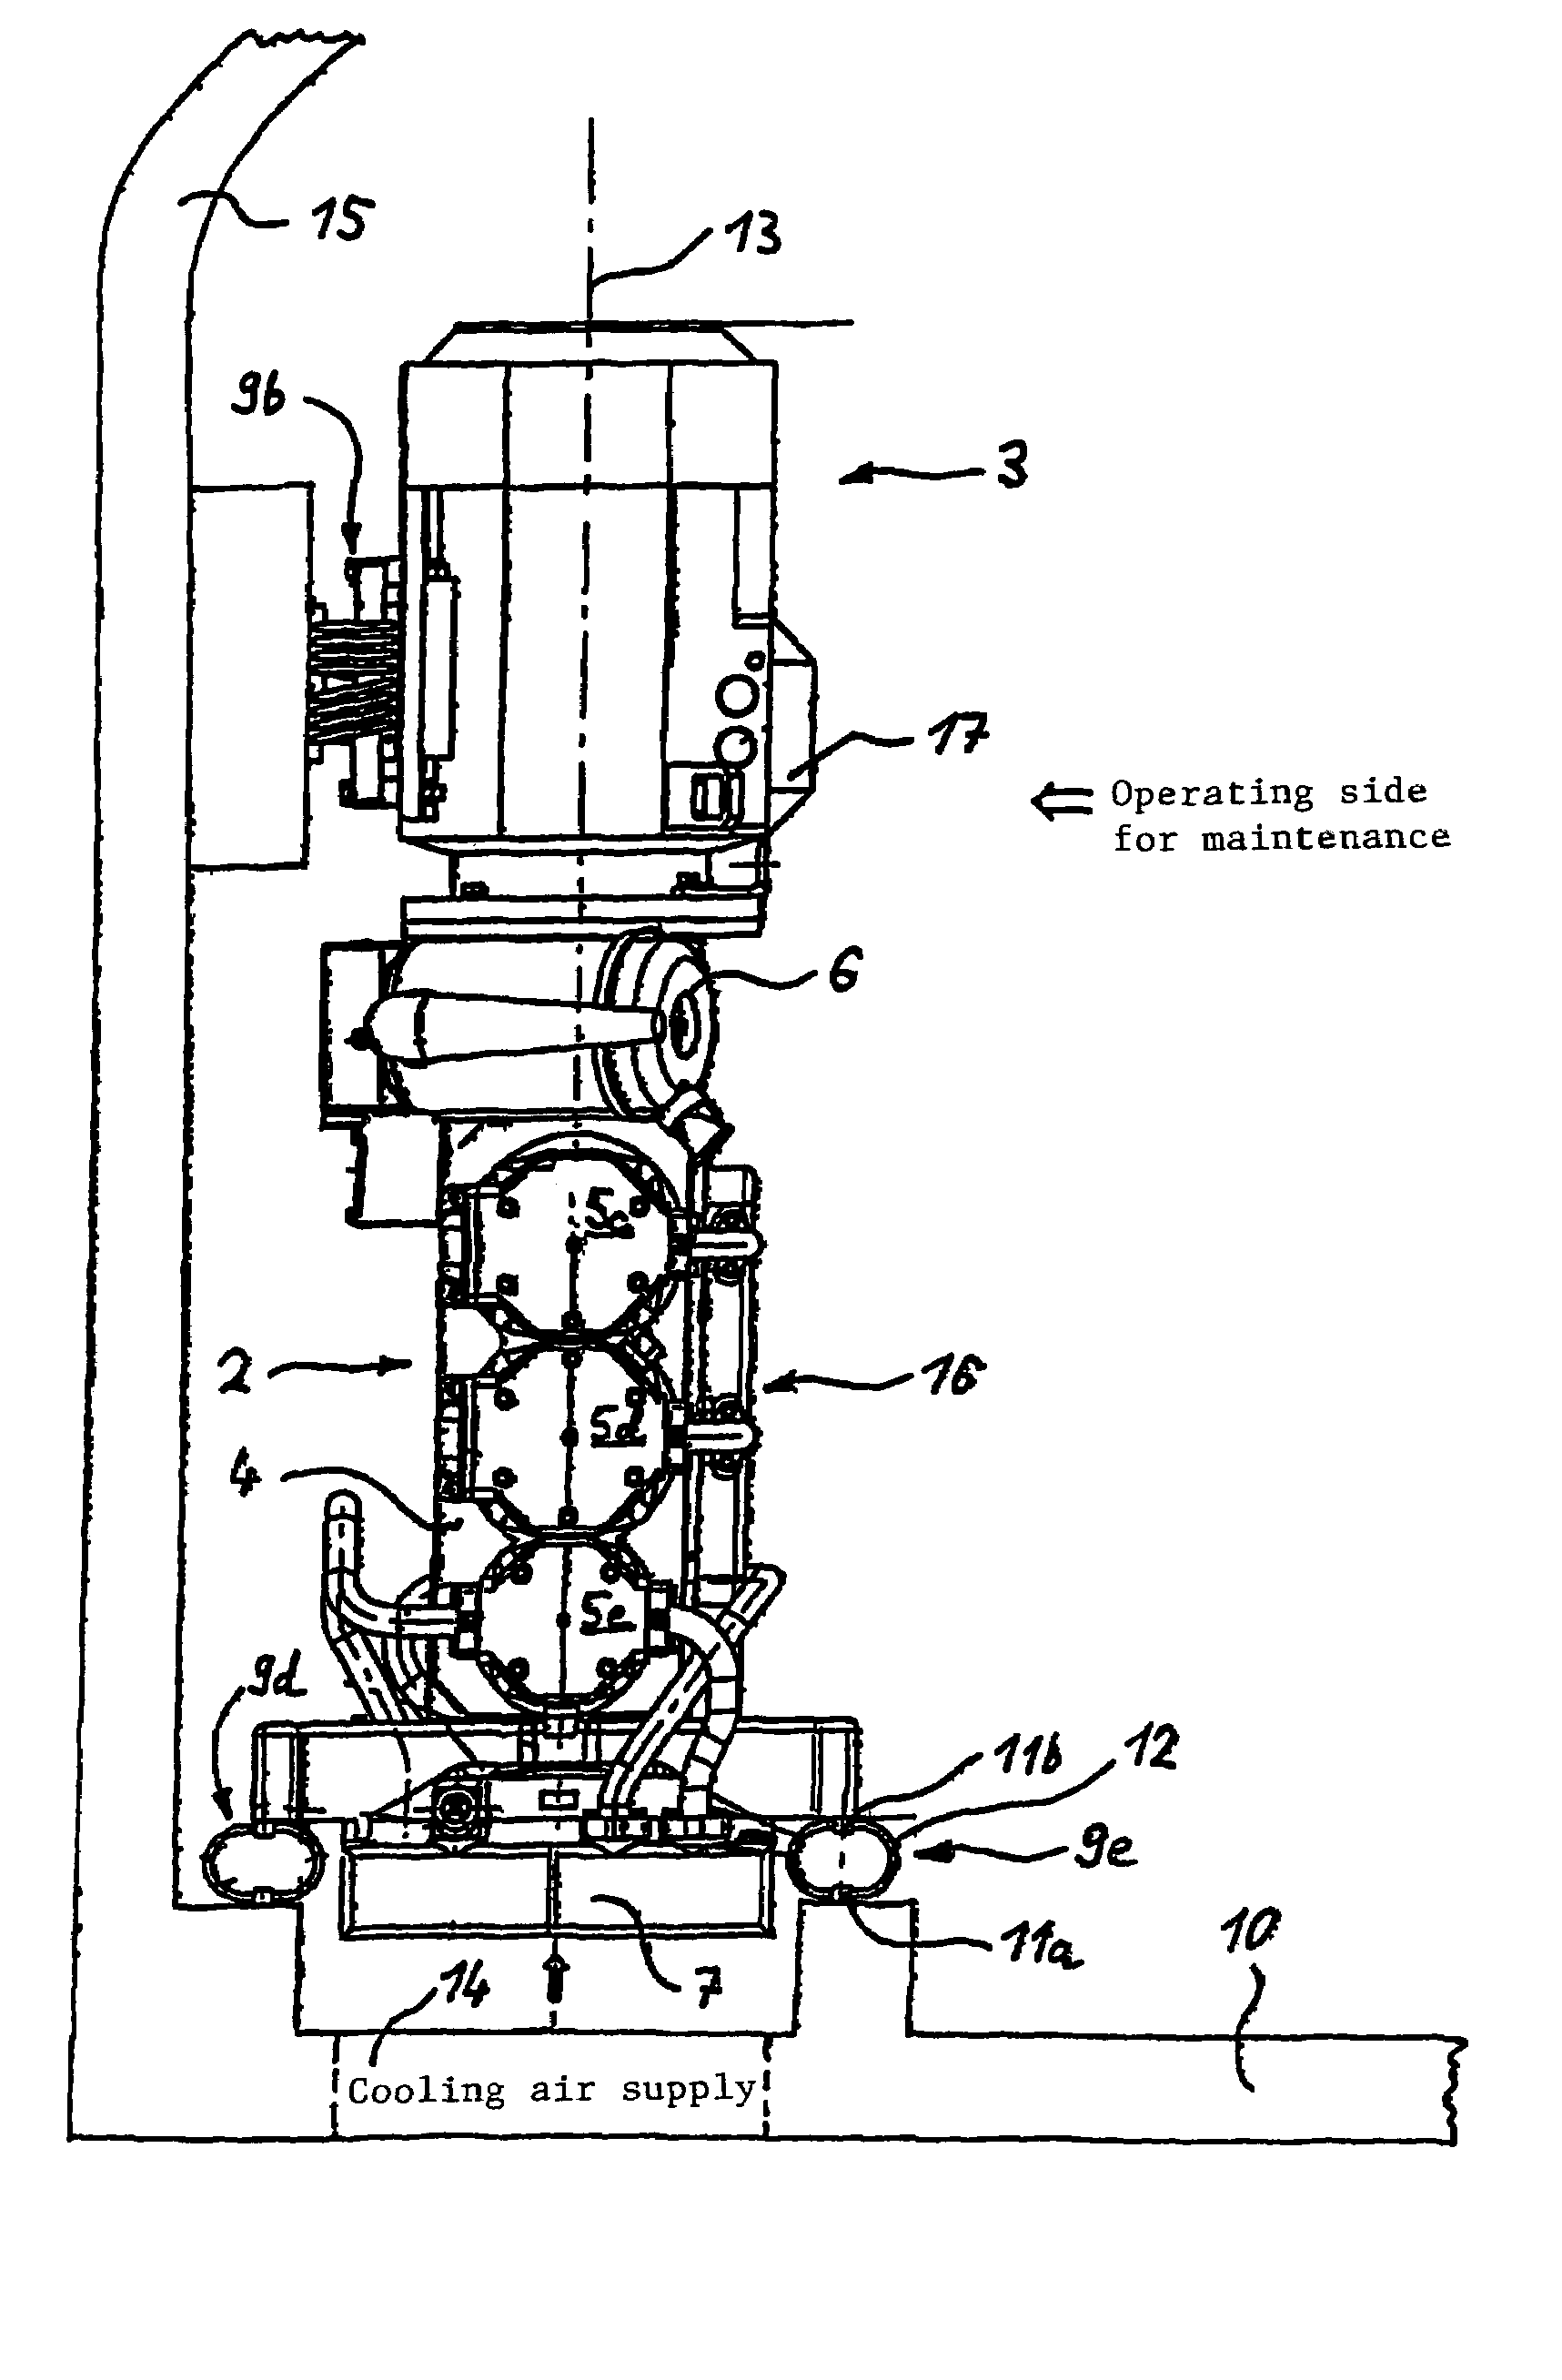 Structure of an oil-free compressor on a vehicle